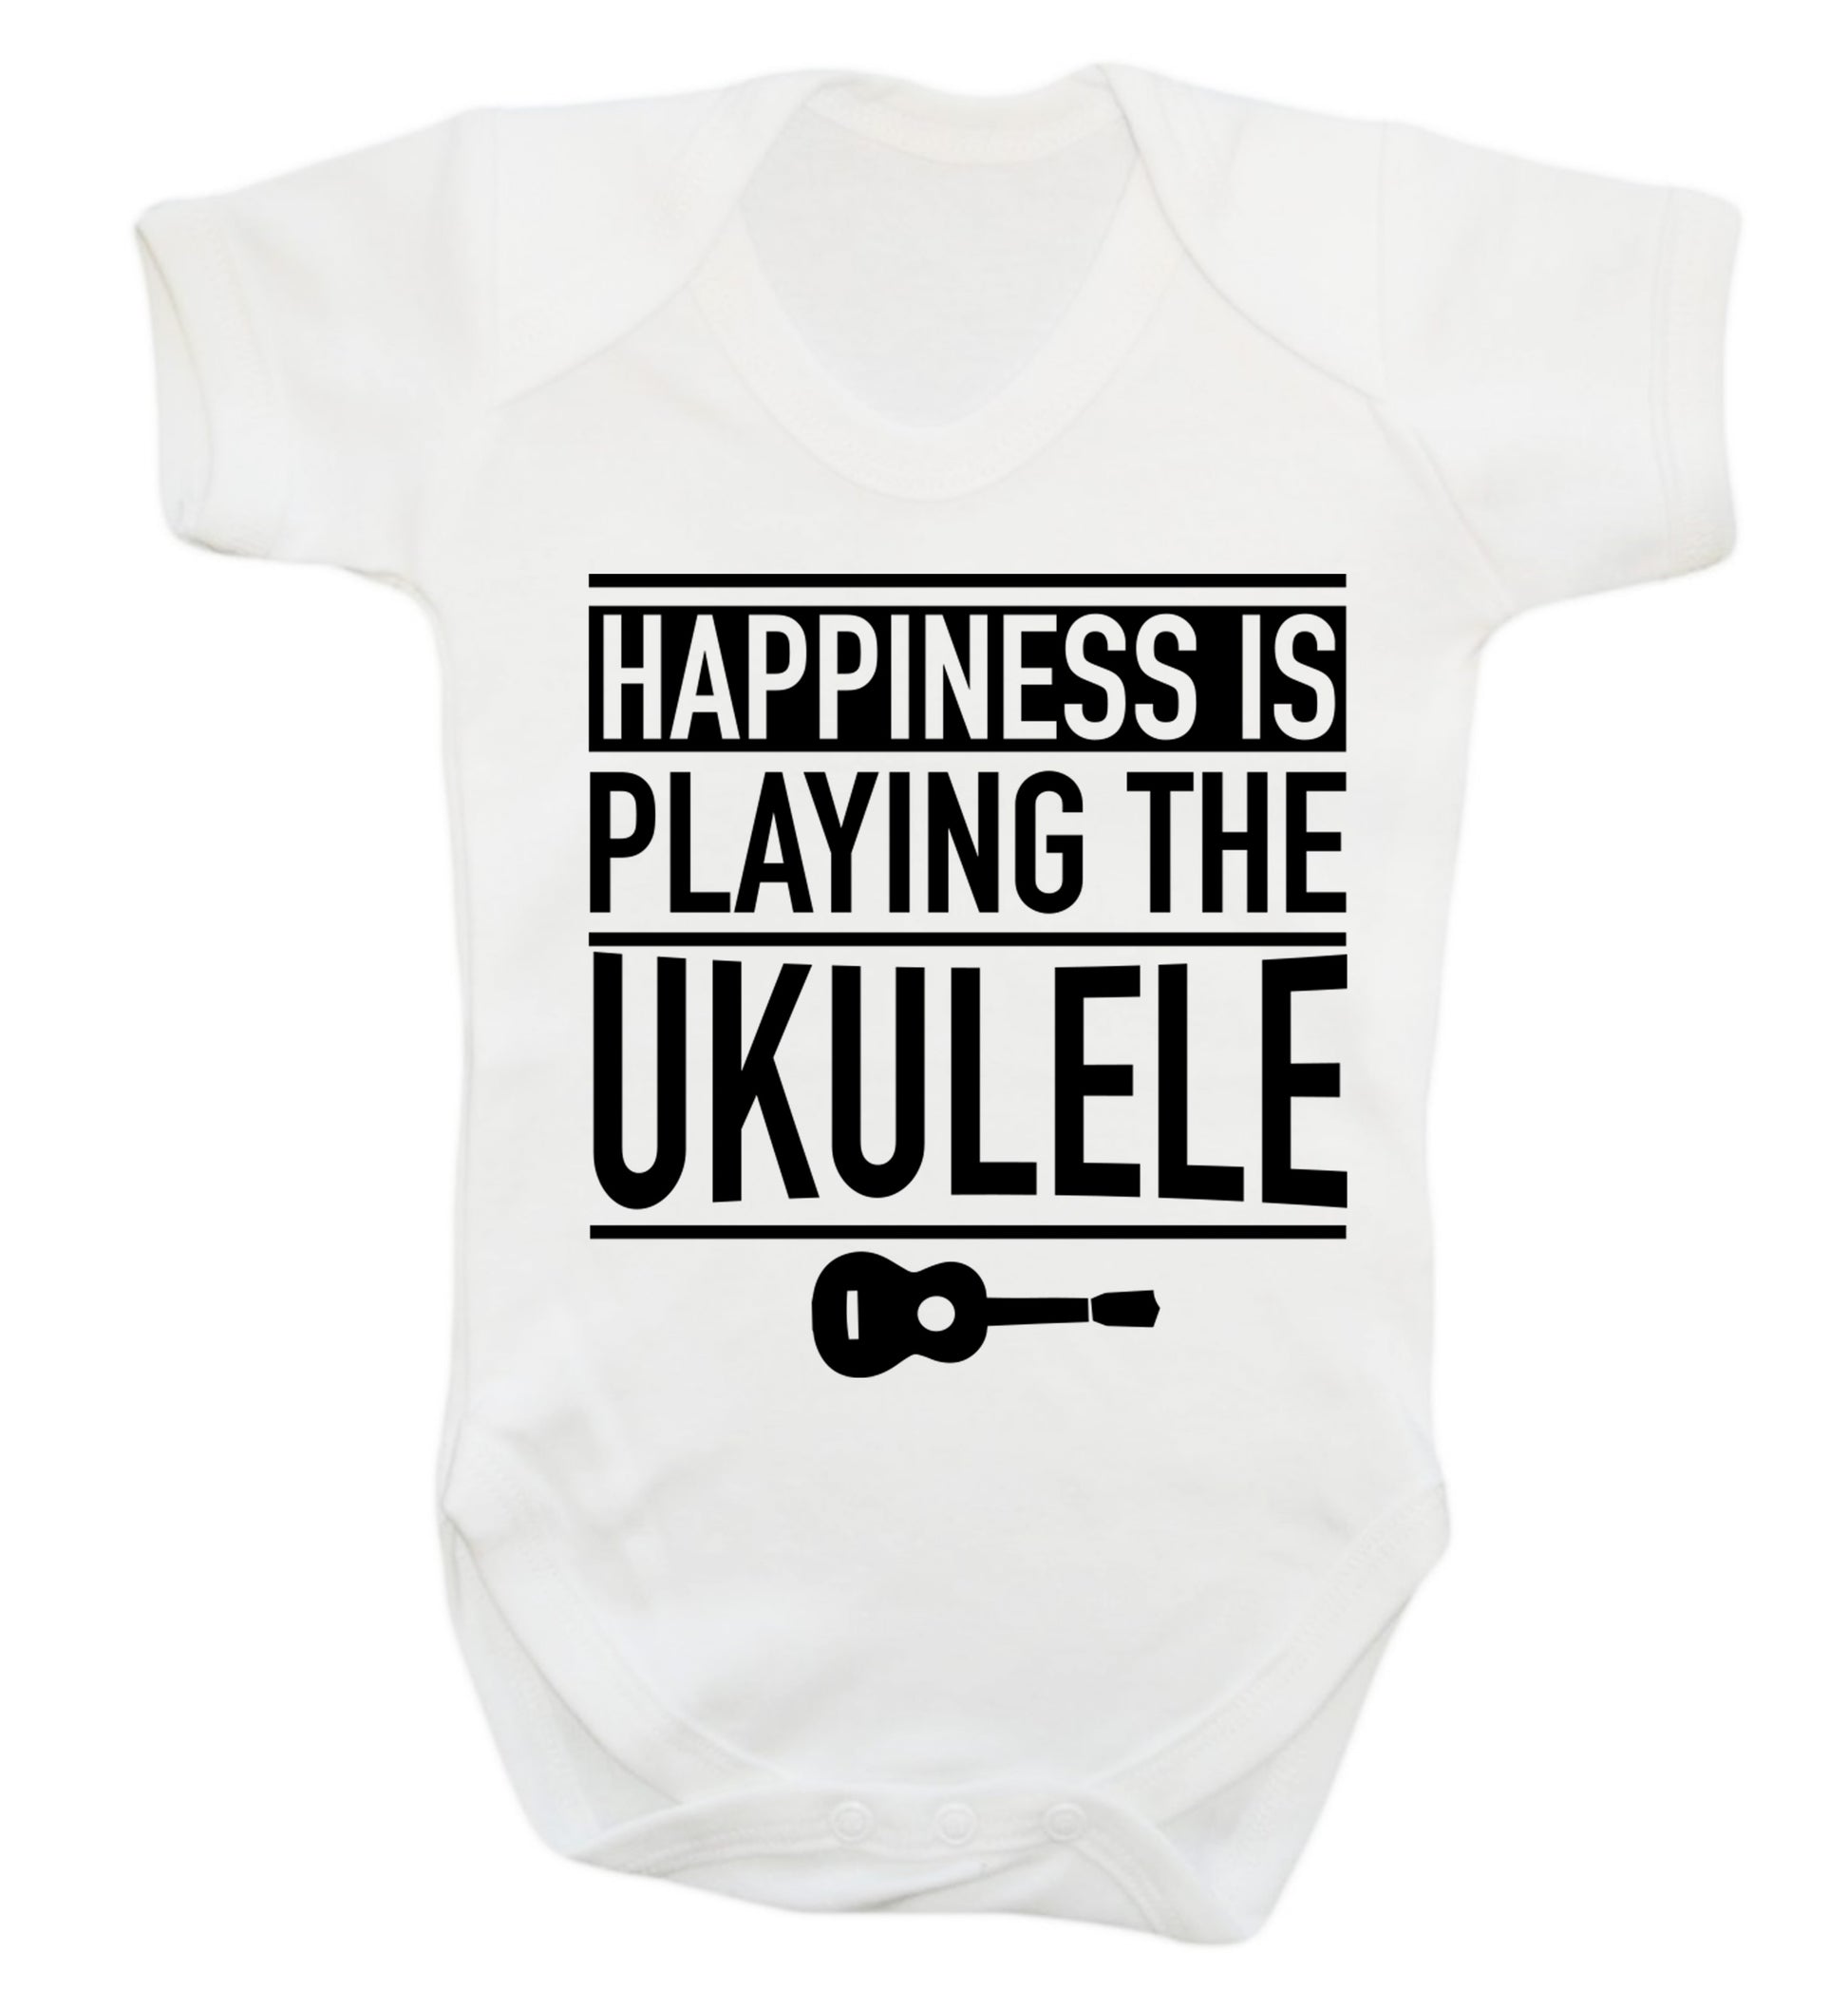 Happines is playing the ukulele Baby Vest white 18-24 months